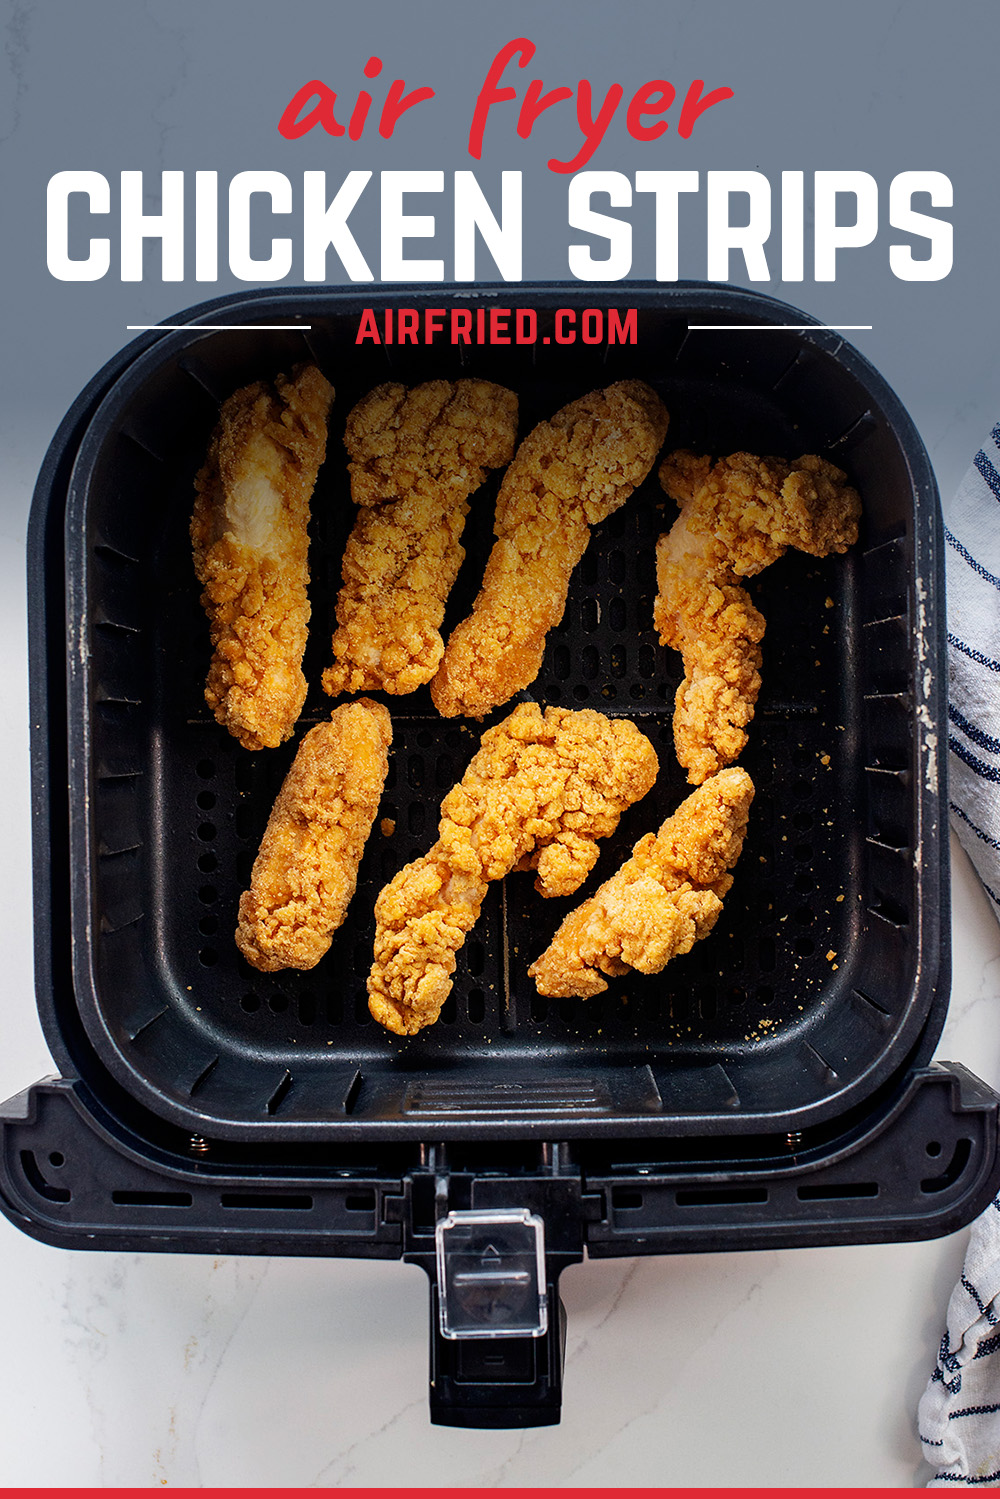 You can get great results cooking your frozen chicken strips in an air fryer in just minutes!